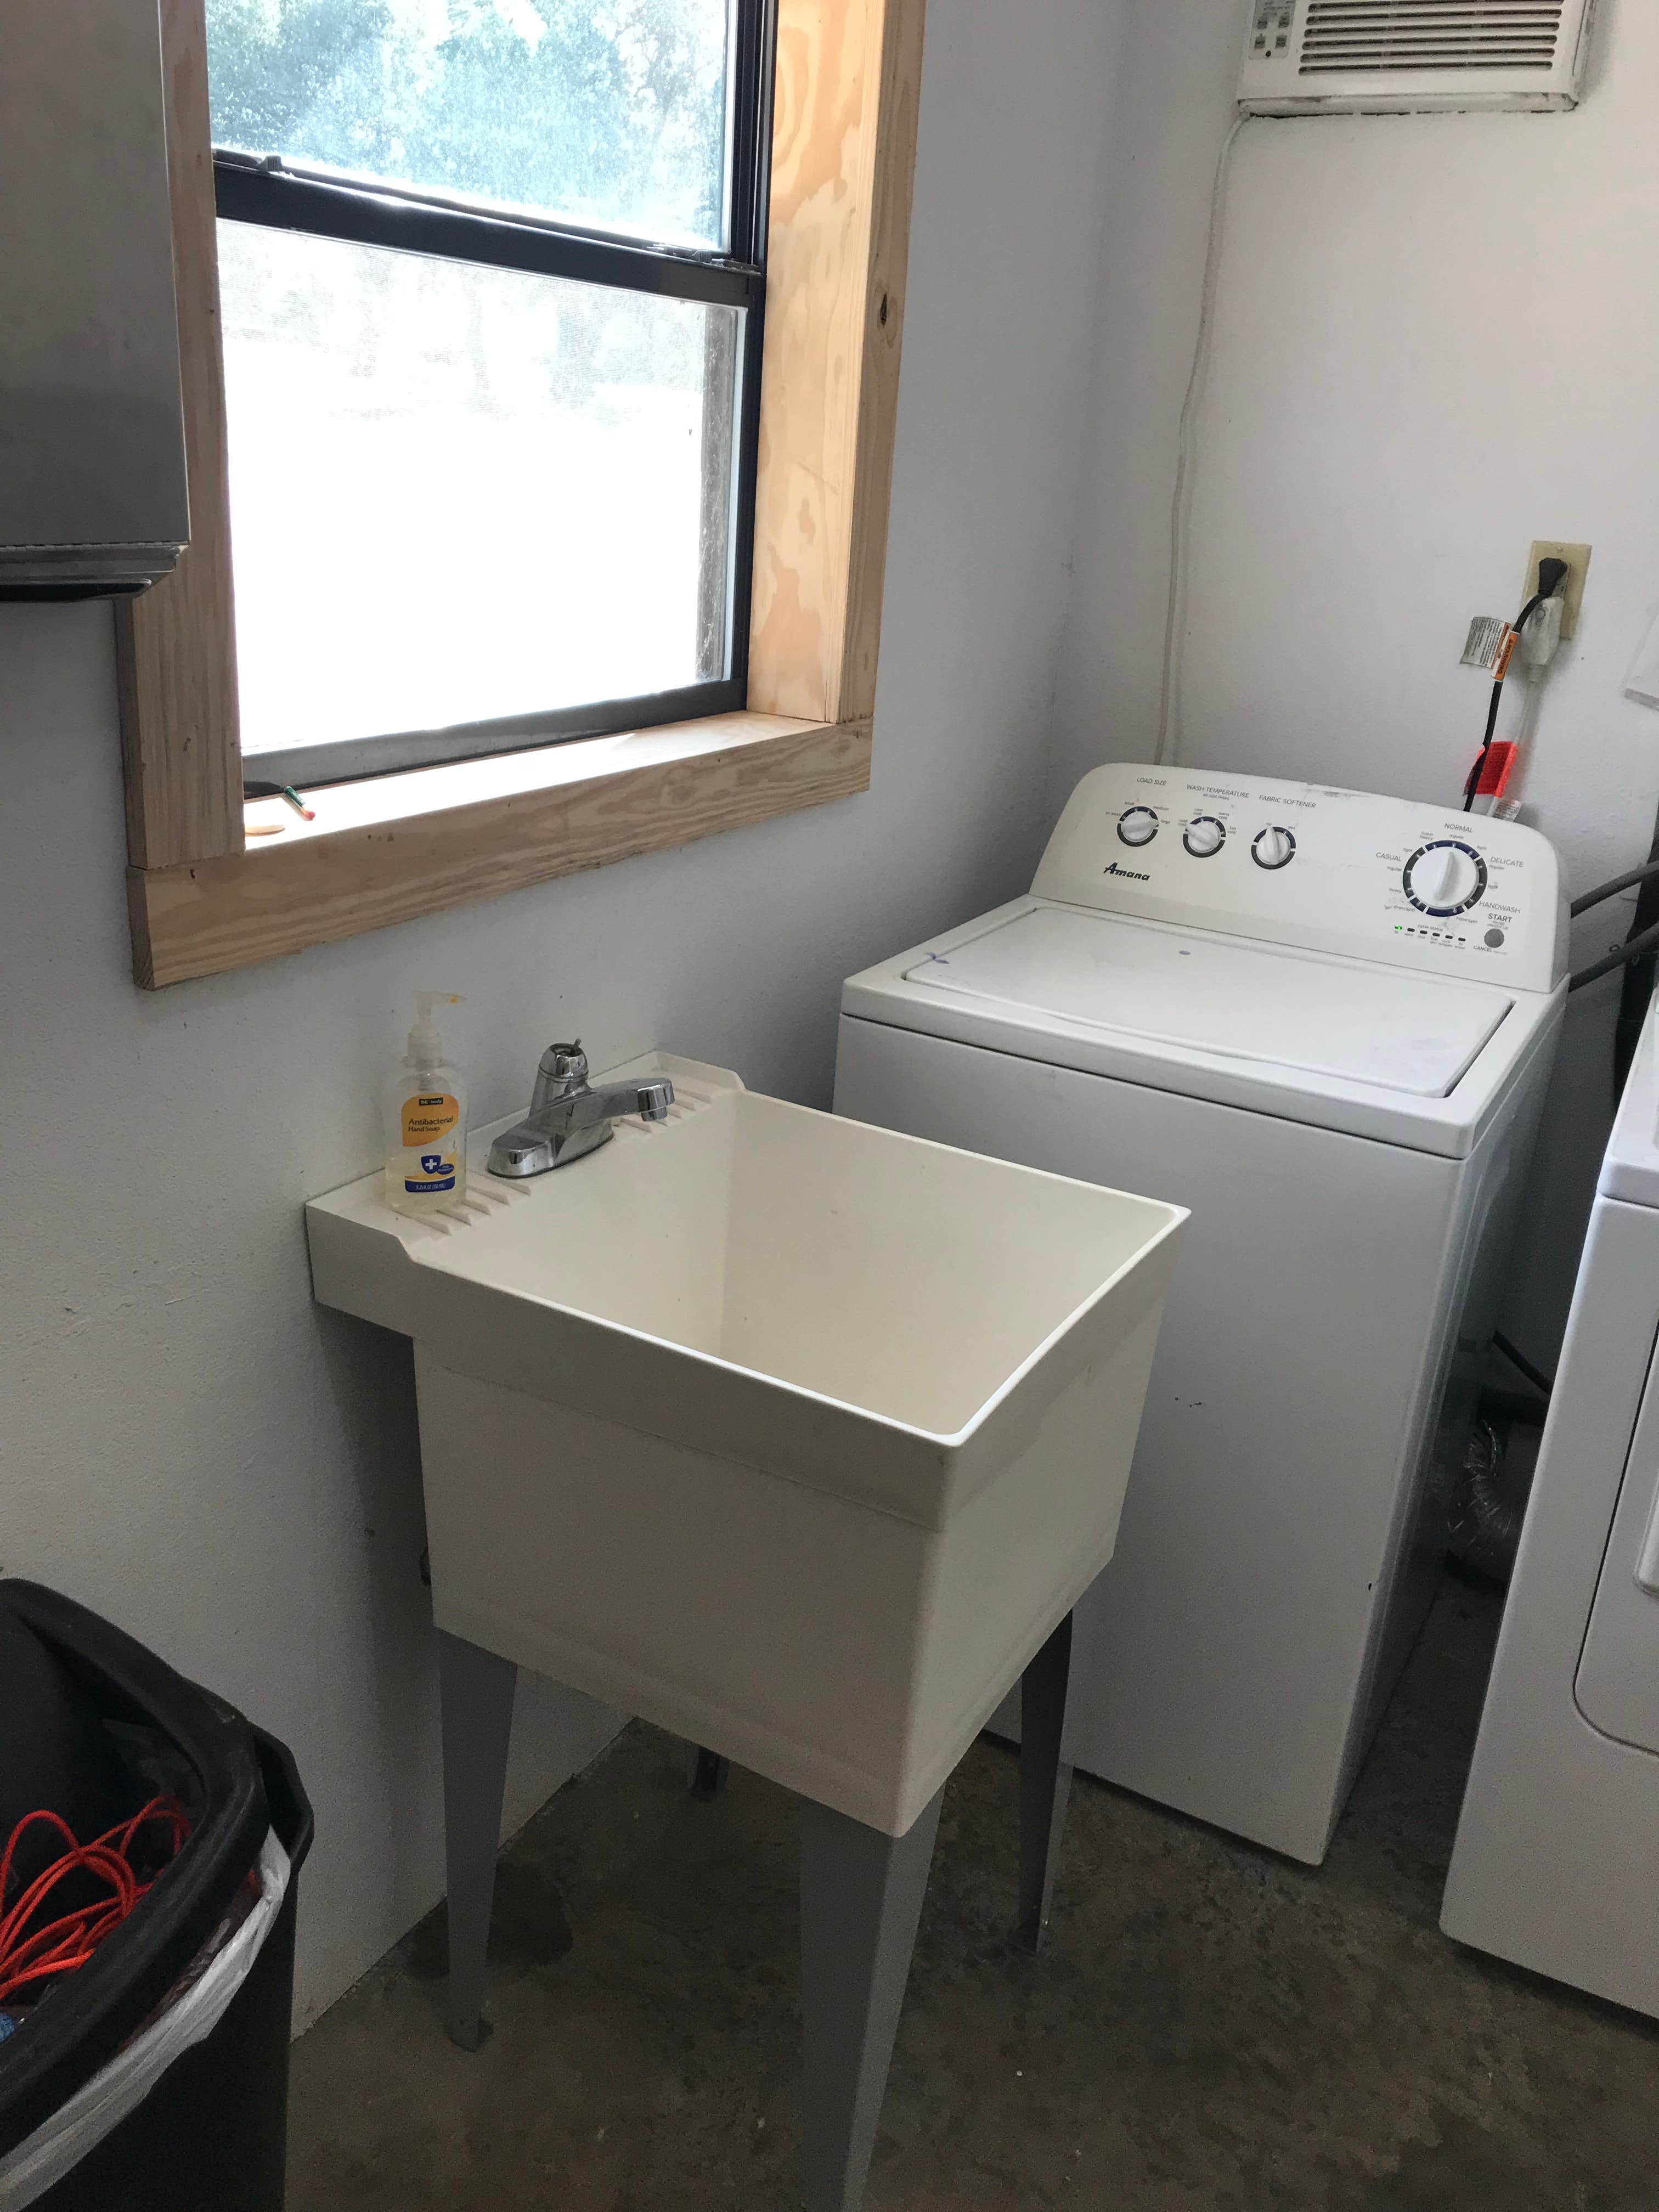 Sink and laundry